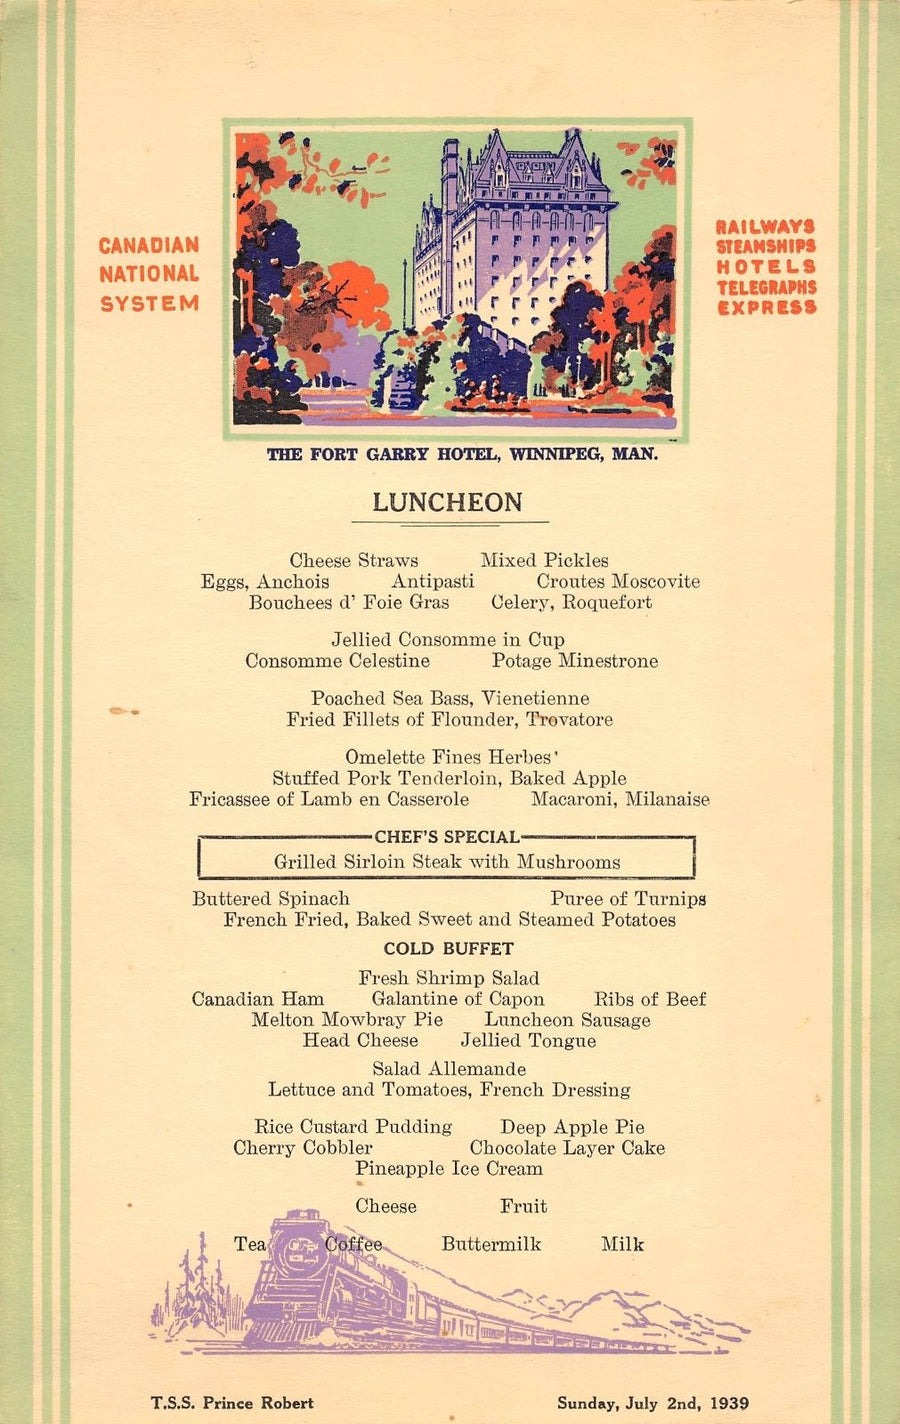 TSS PRINCE ROBERT CANADIAN STEAMSHIPS FORT GARRY HOTEL ANTIQUE LUNCH MENU 1939 - K-townConsignments